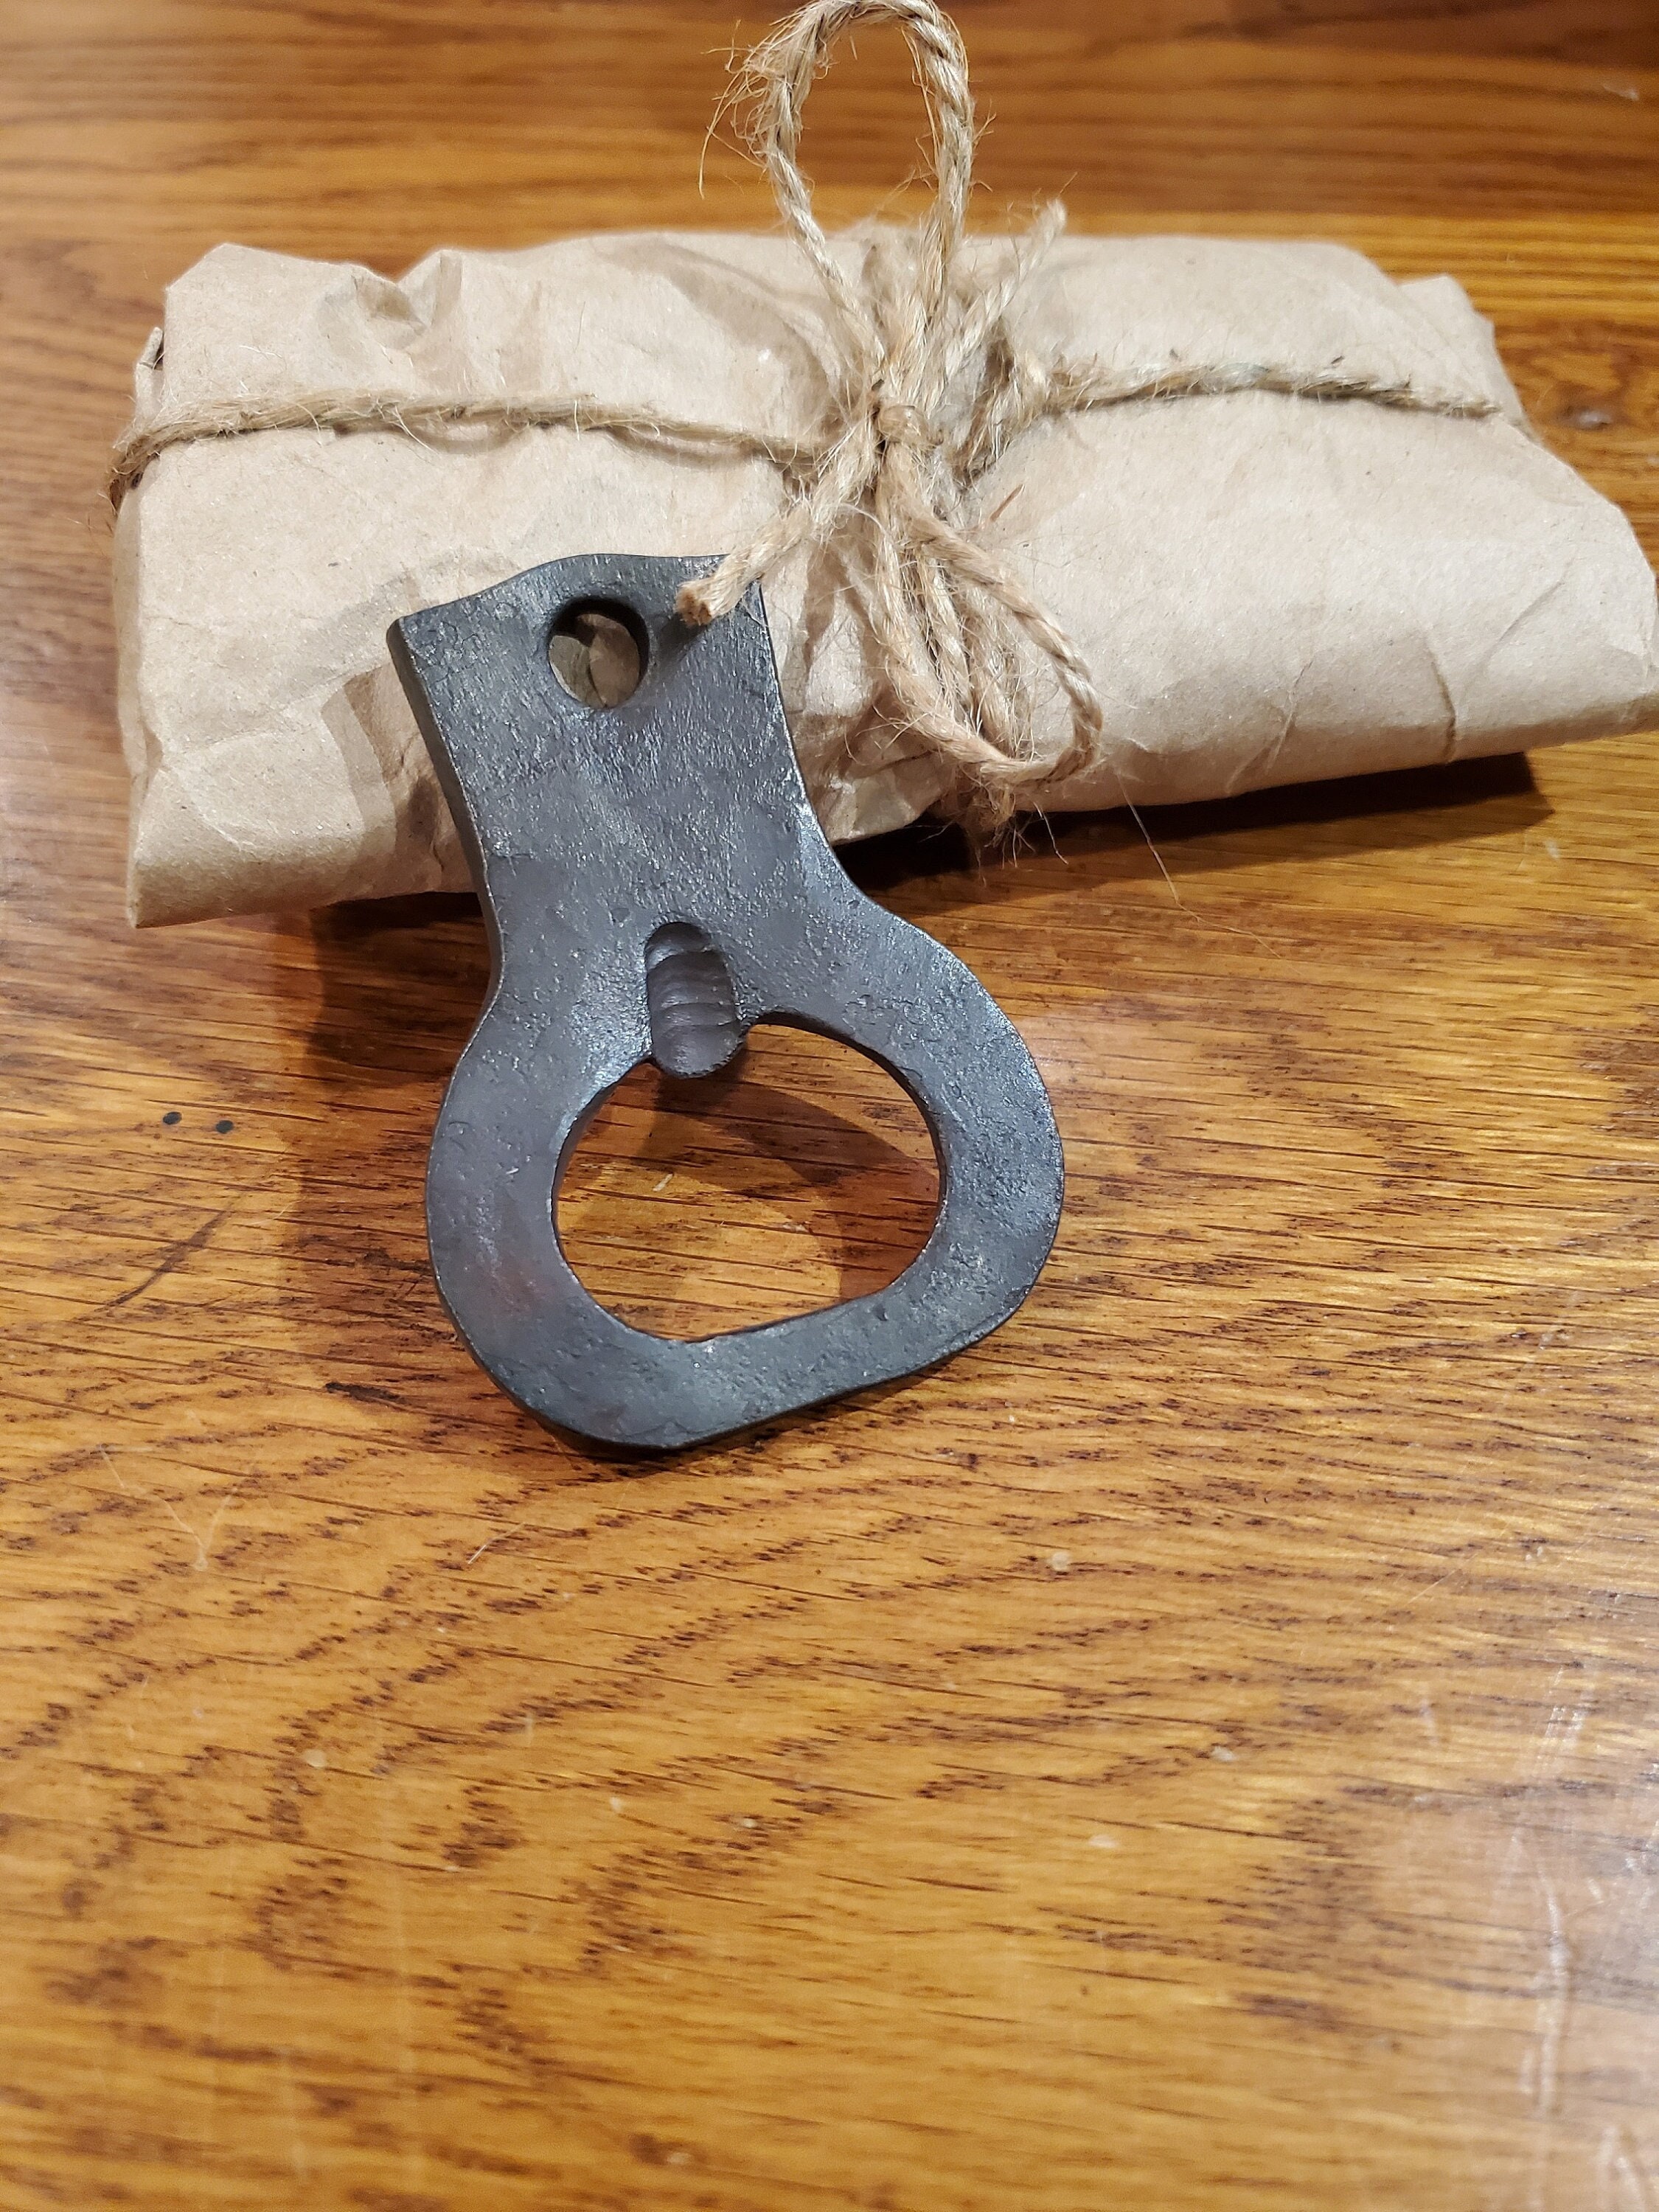 Handcrafted Forged Bottle Opener with Twist Handle and Ball – MOUNTAIN  ELEMENT